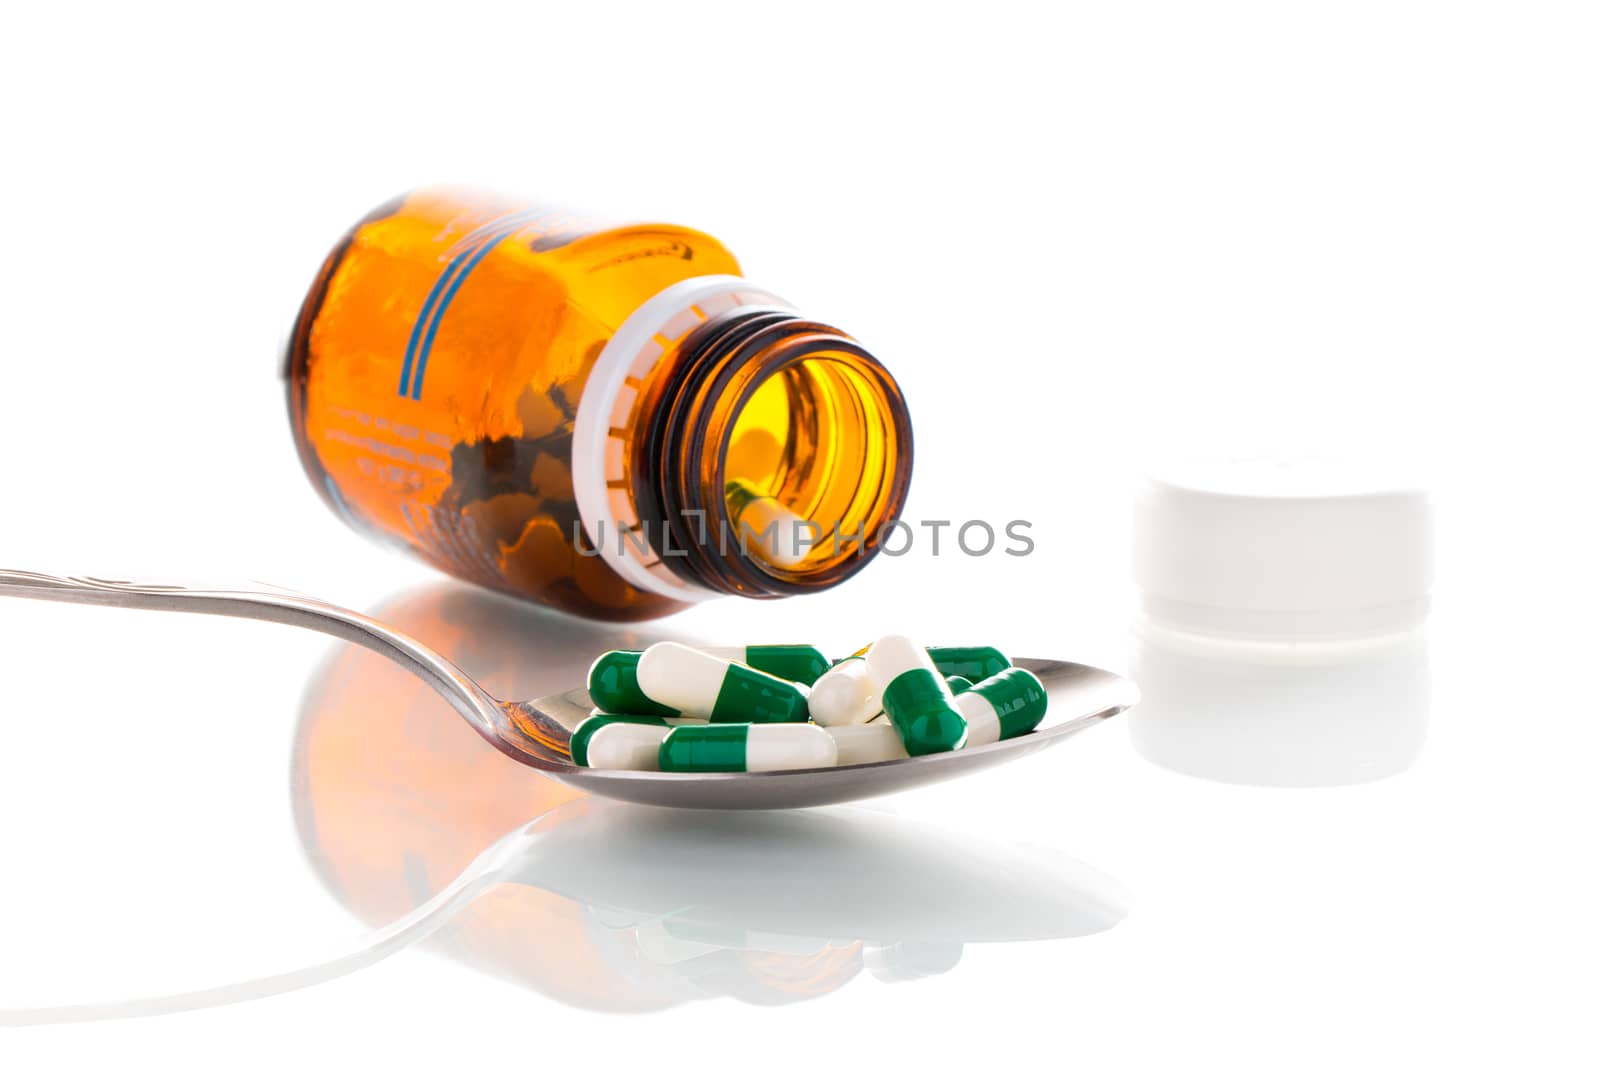 Tablets on a spoon with a brown bottle, on a white background